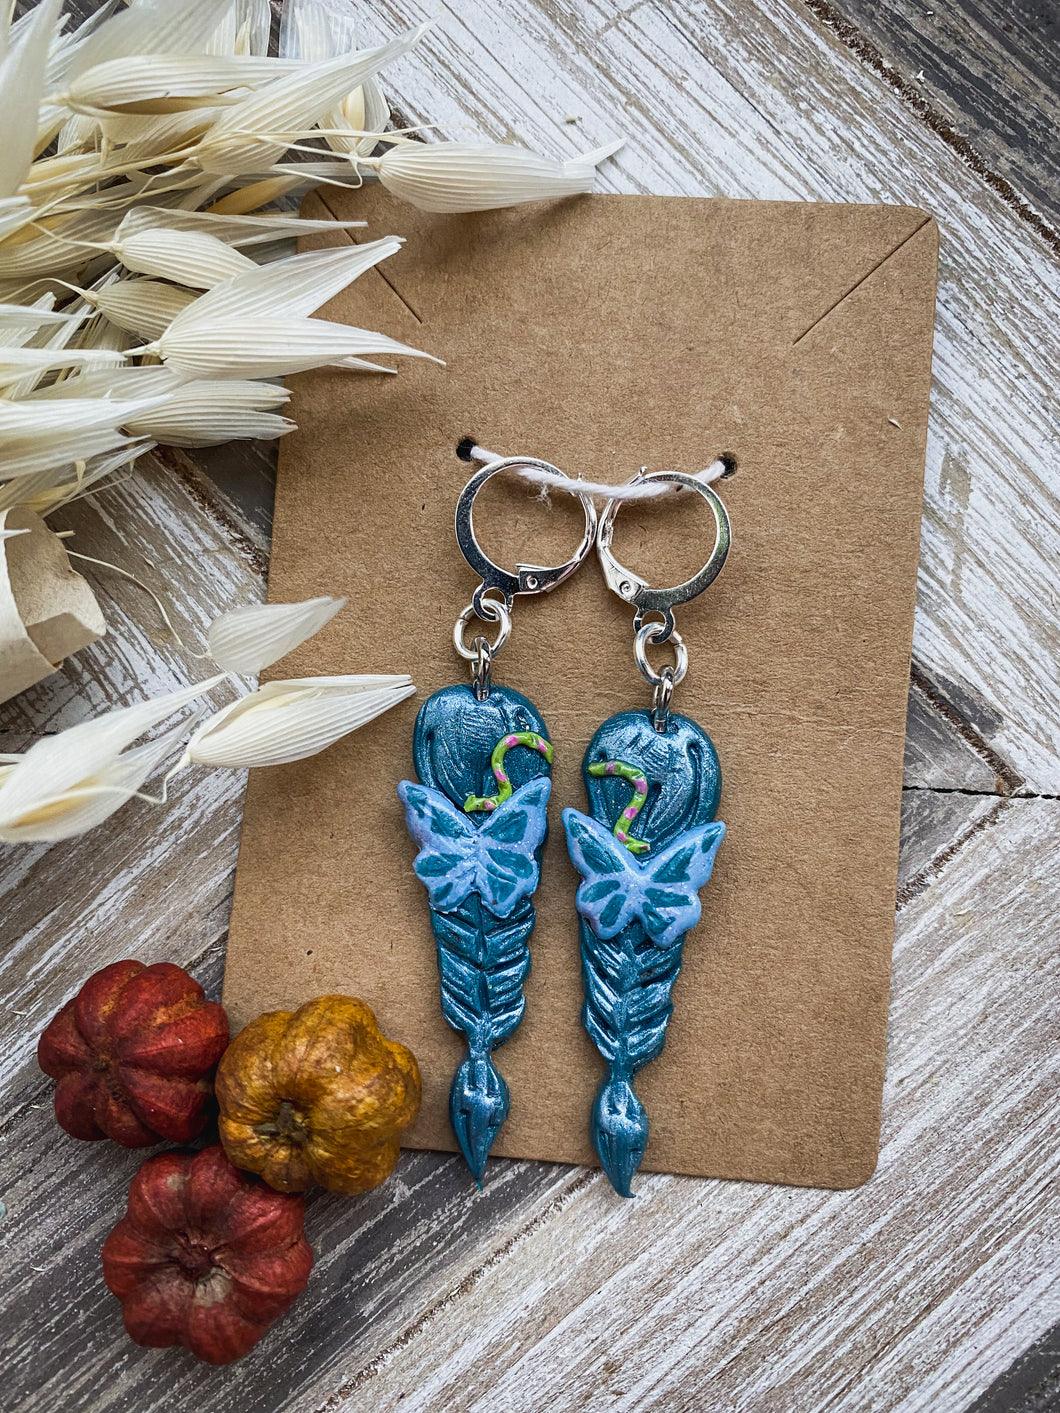 Braided Earrings | Corpse Bride | Polymer Clay Jewelry